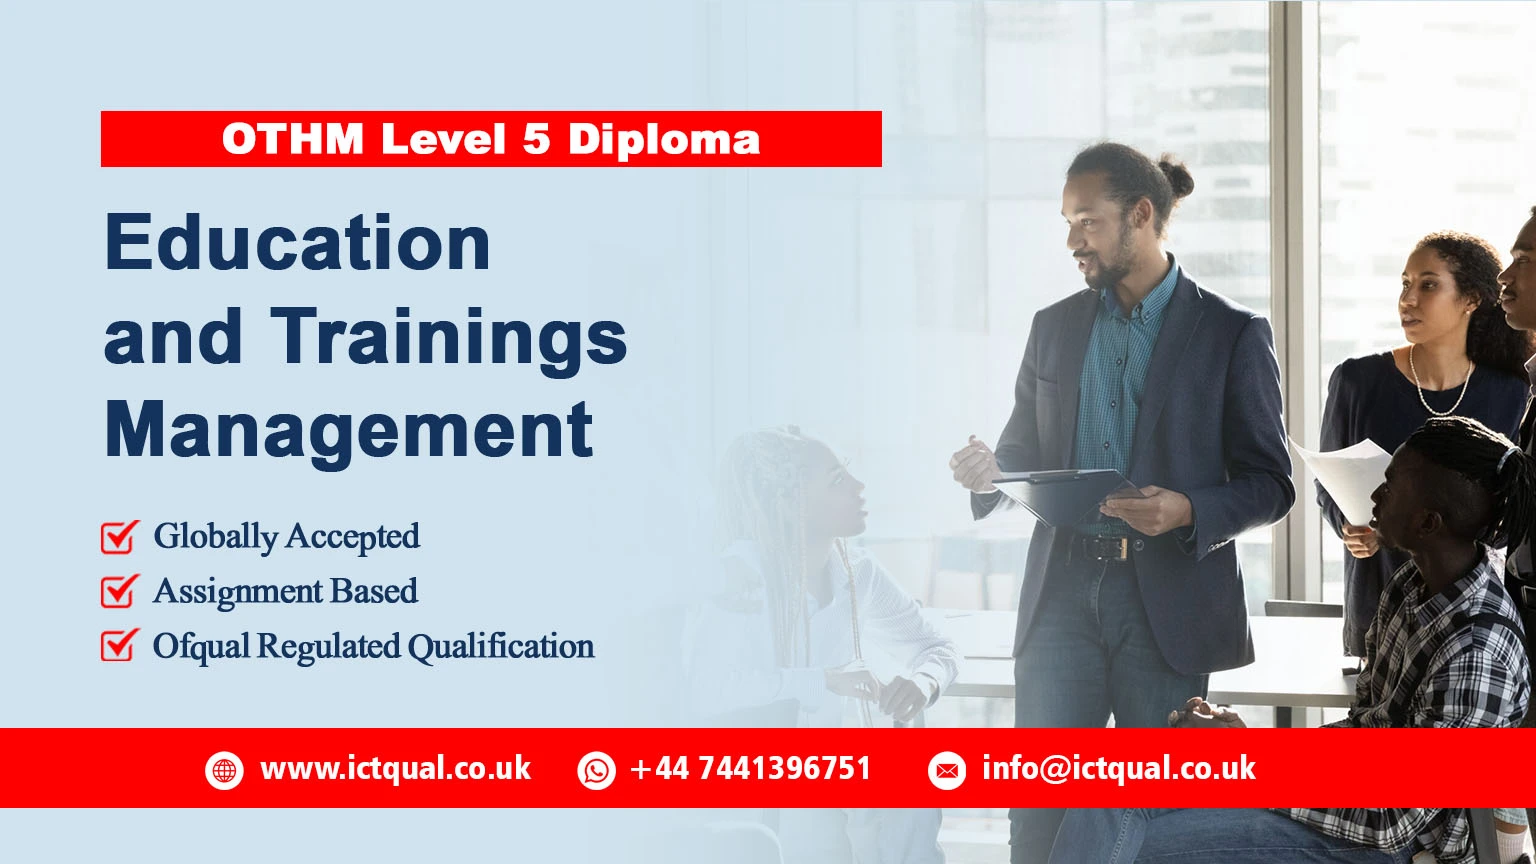 OTHM Level 5 Diploma in Education and Trainings Management